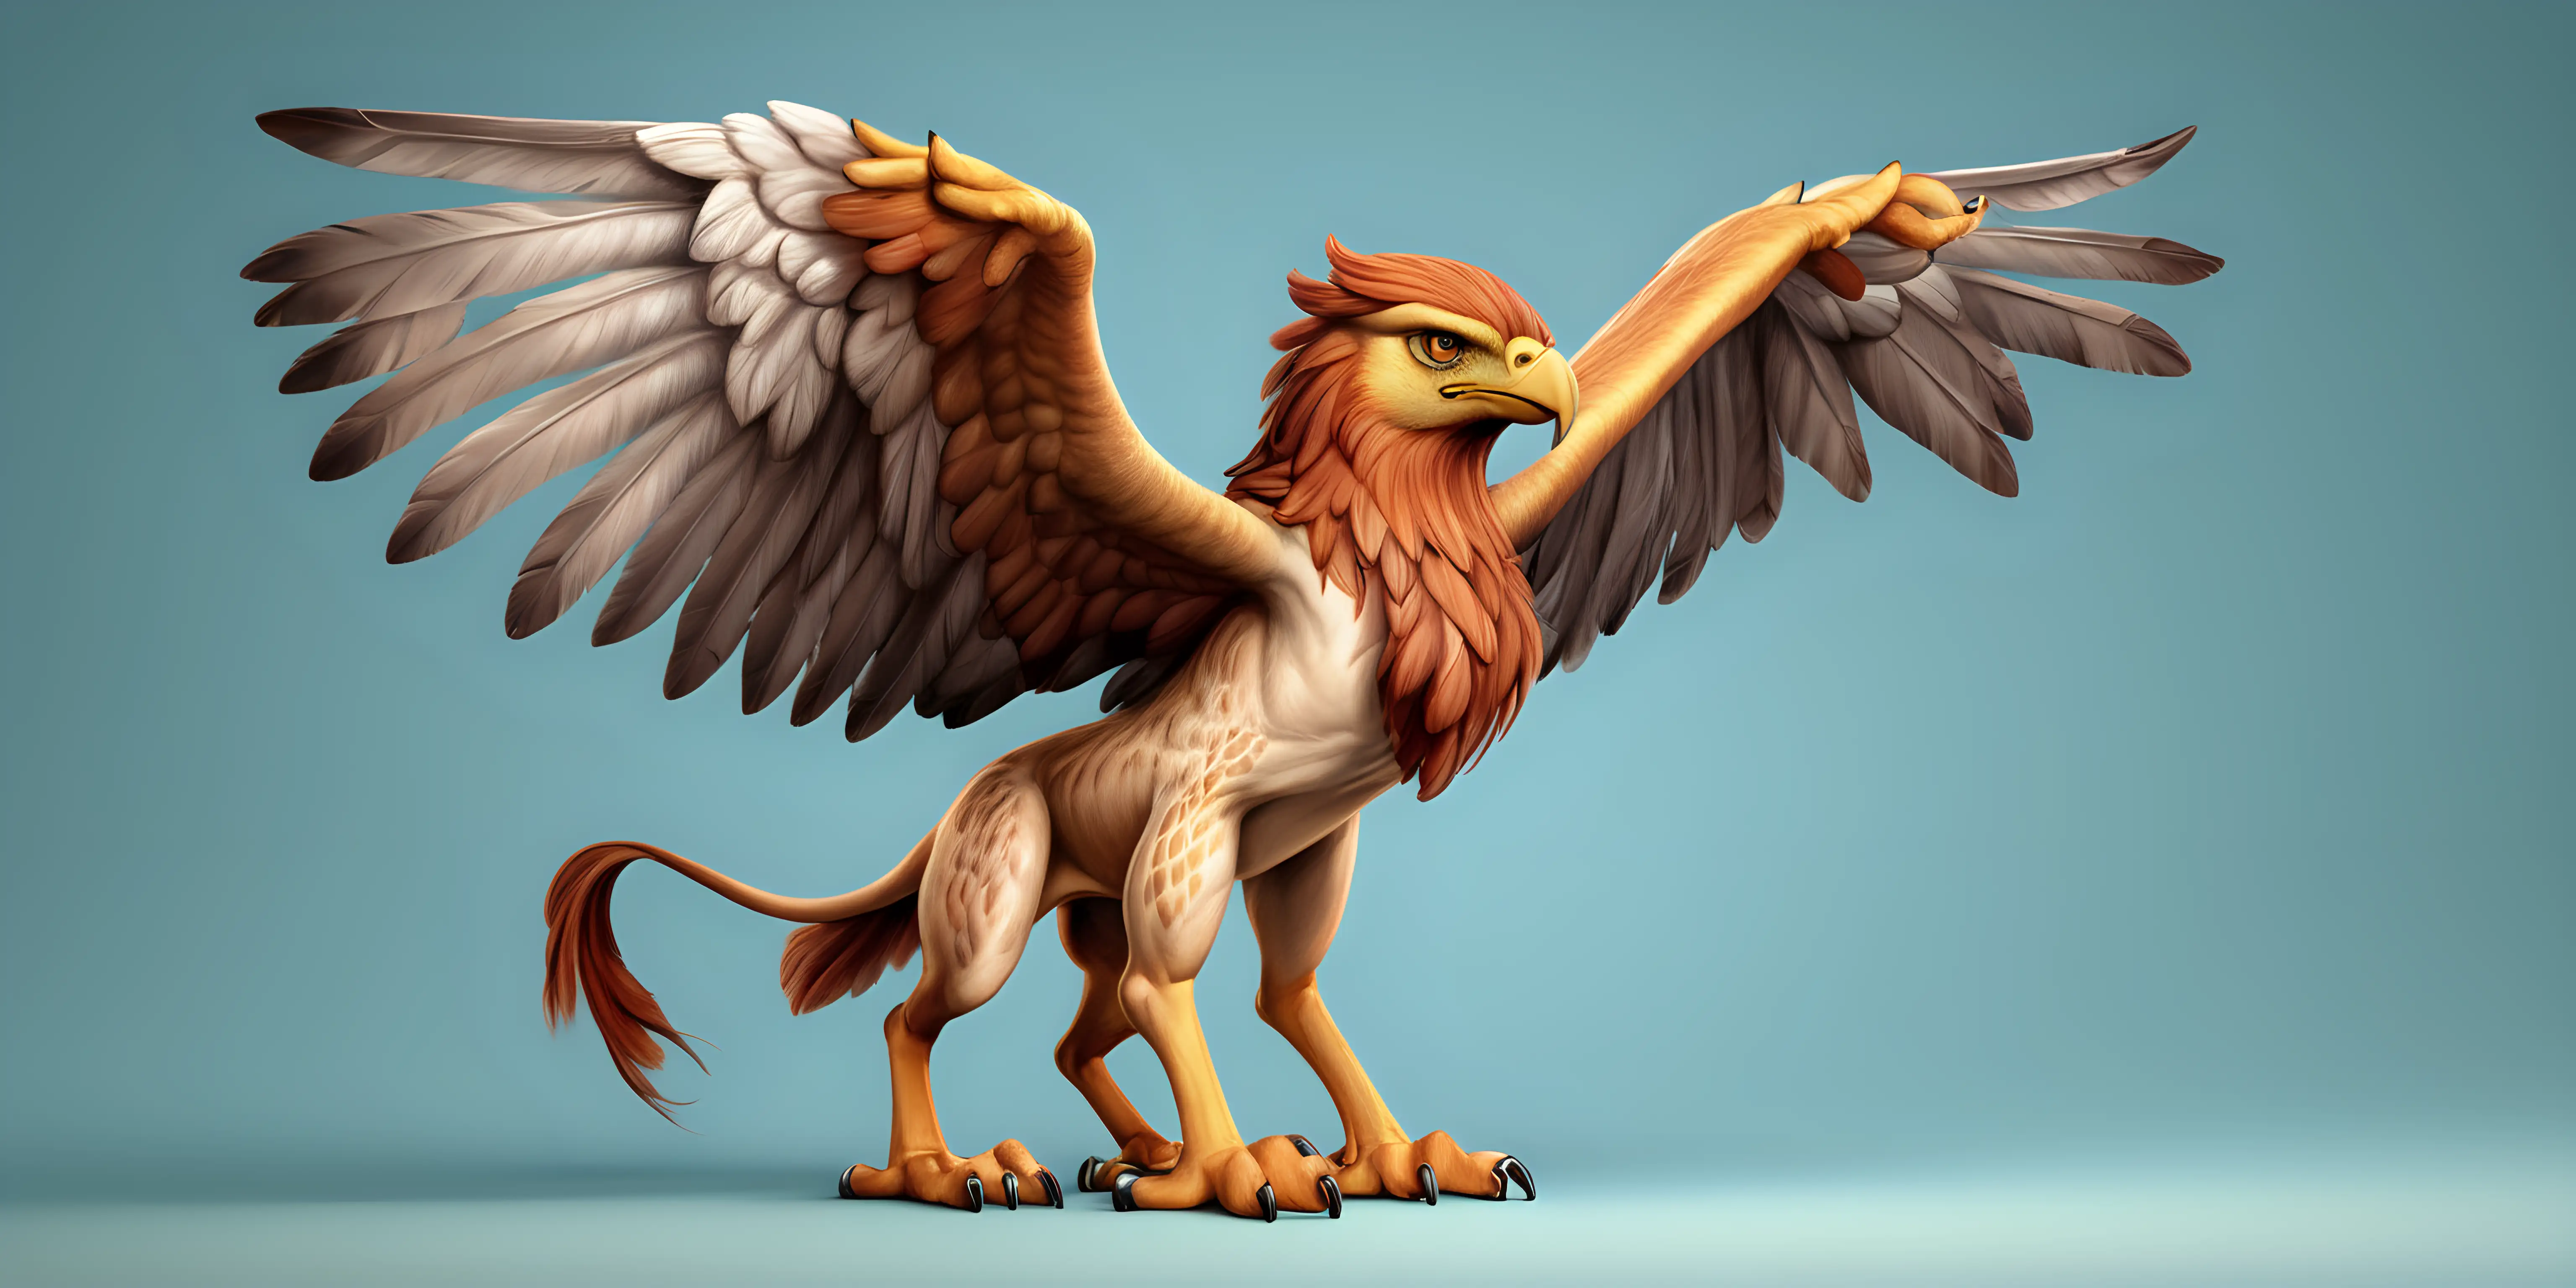 Realistic Cartoon Griffin Illustration on Solid Background